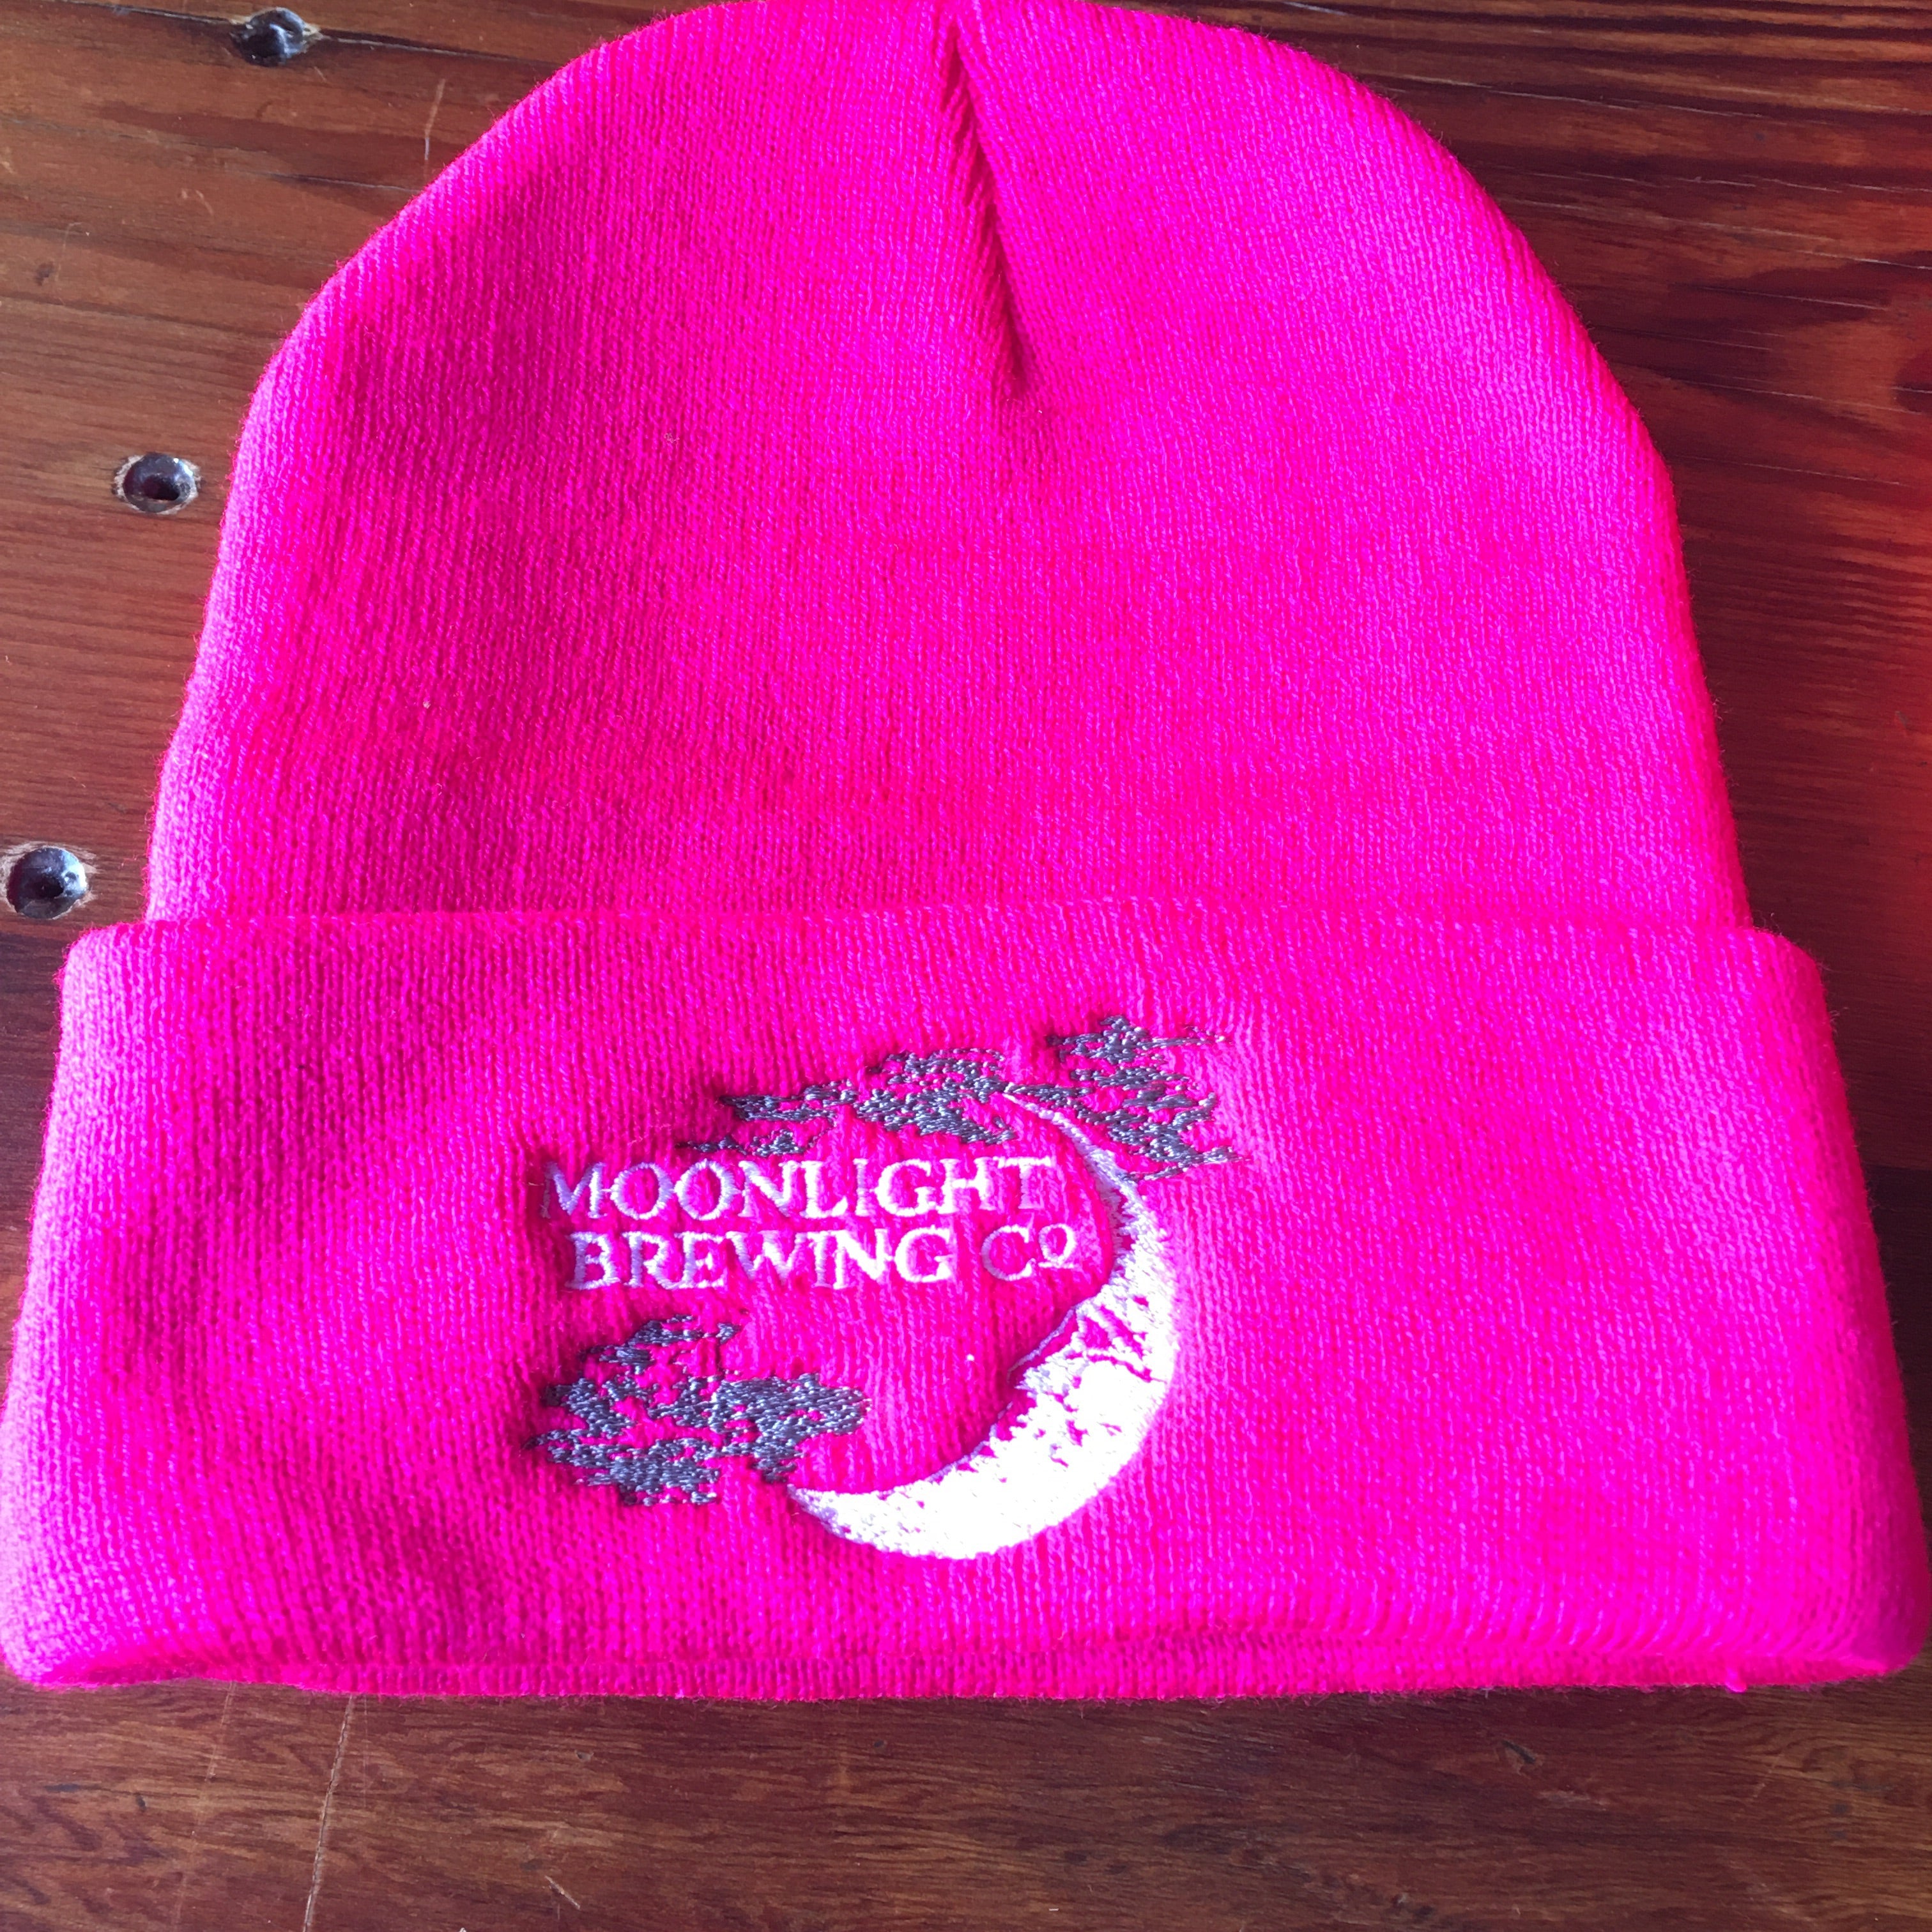 Hot pink beanie with Moonlight Brewing logo on the front